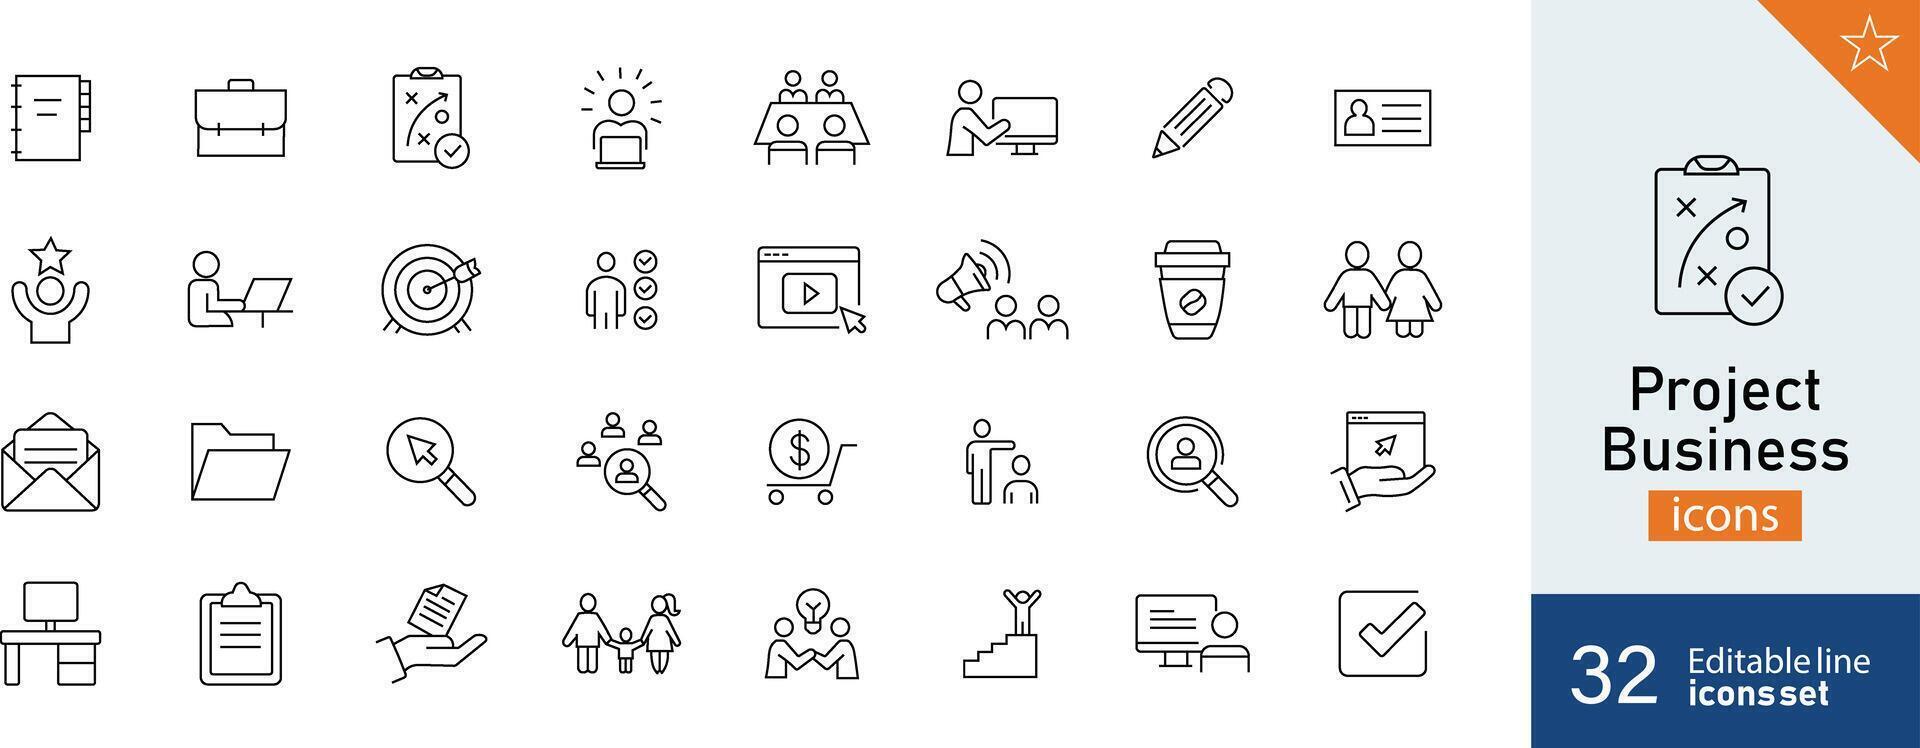 Set of 32 Project Business icons in line style. shopping, commerce, icon, store. Vector illustration.